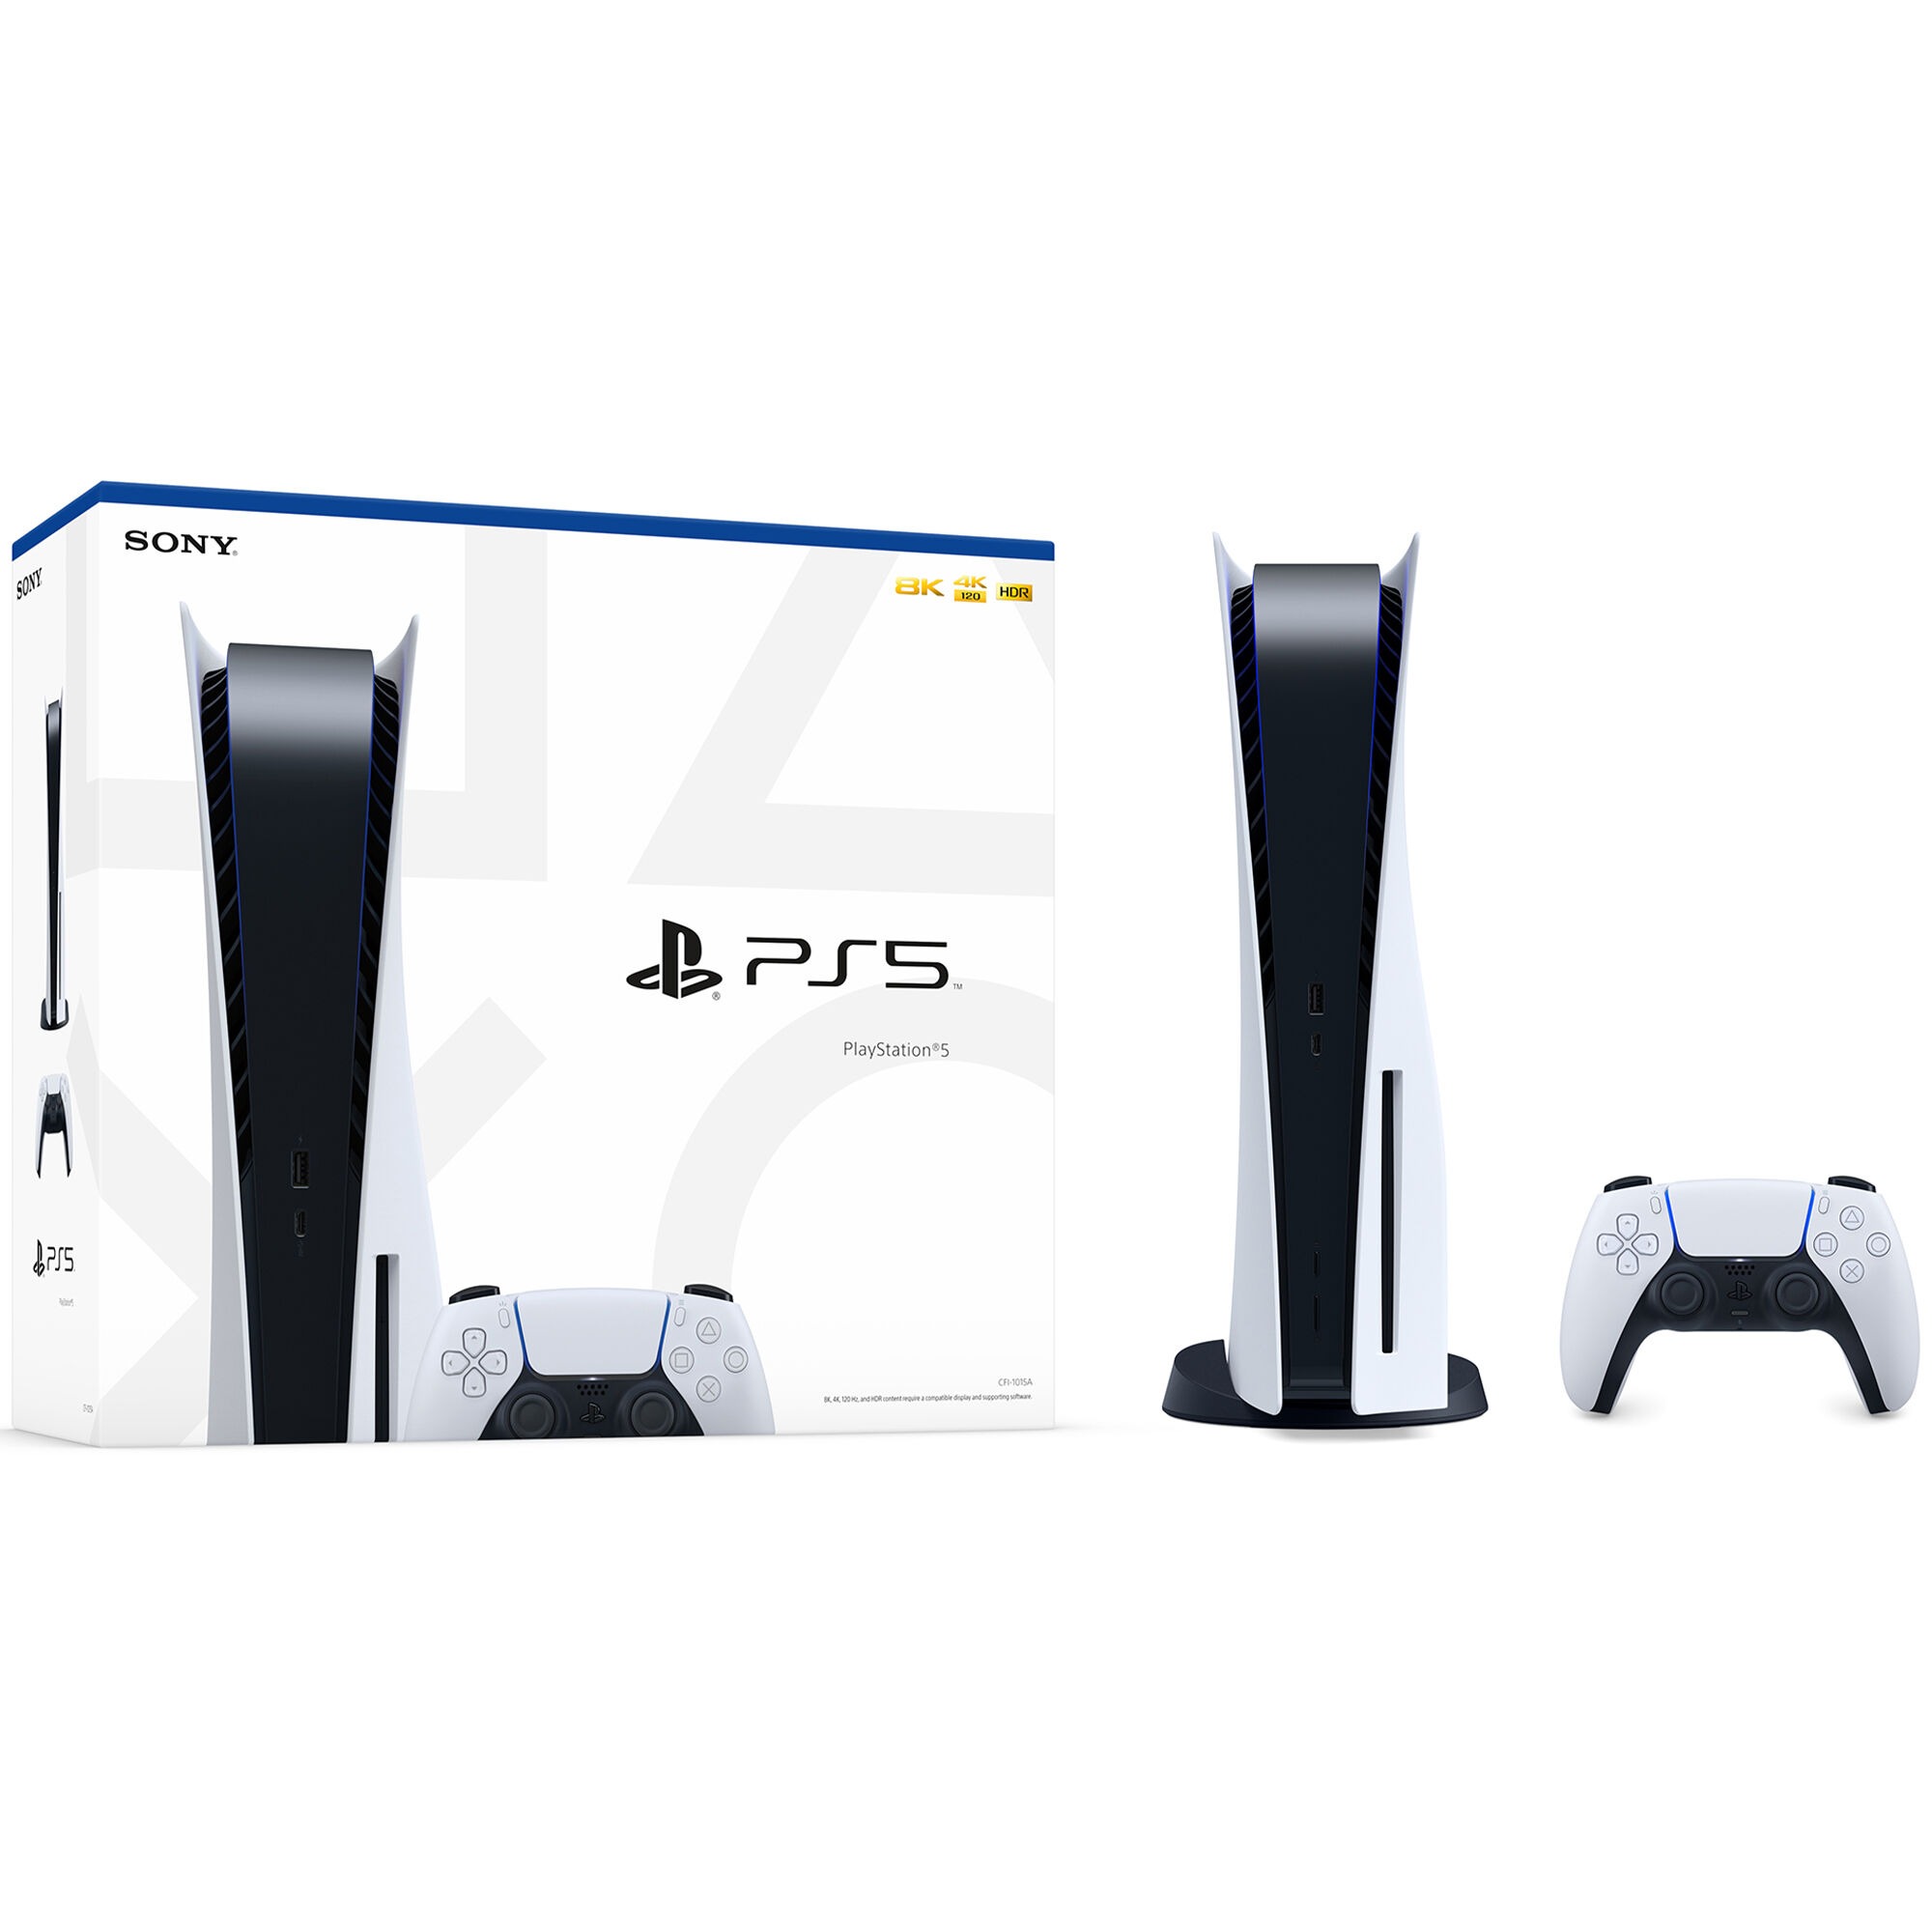 PlayStation 5 console